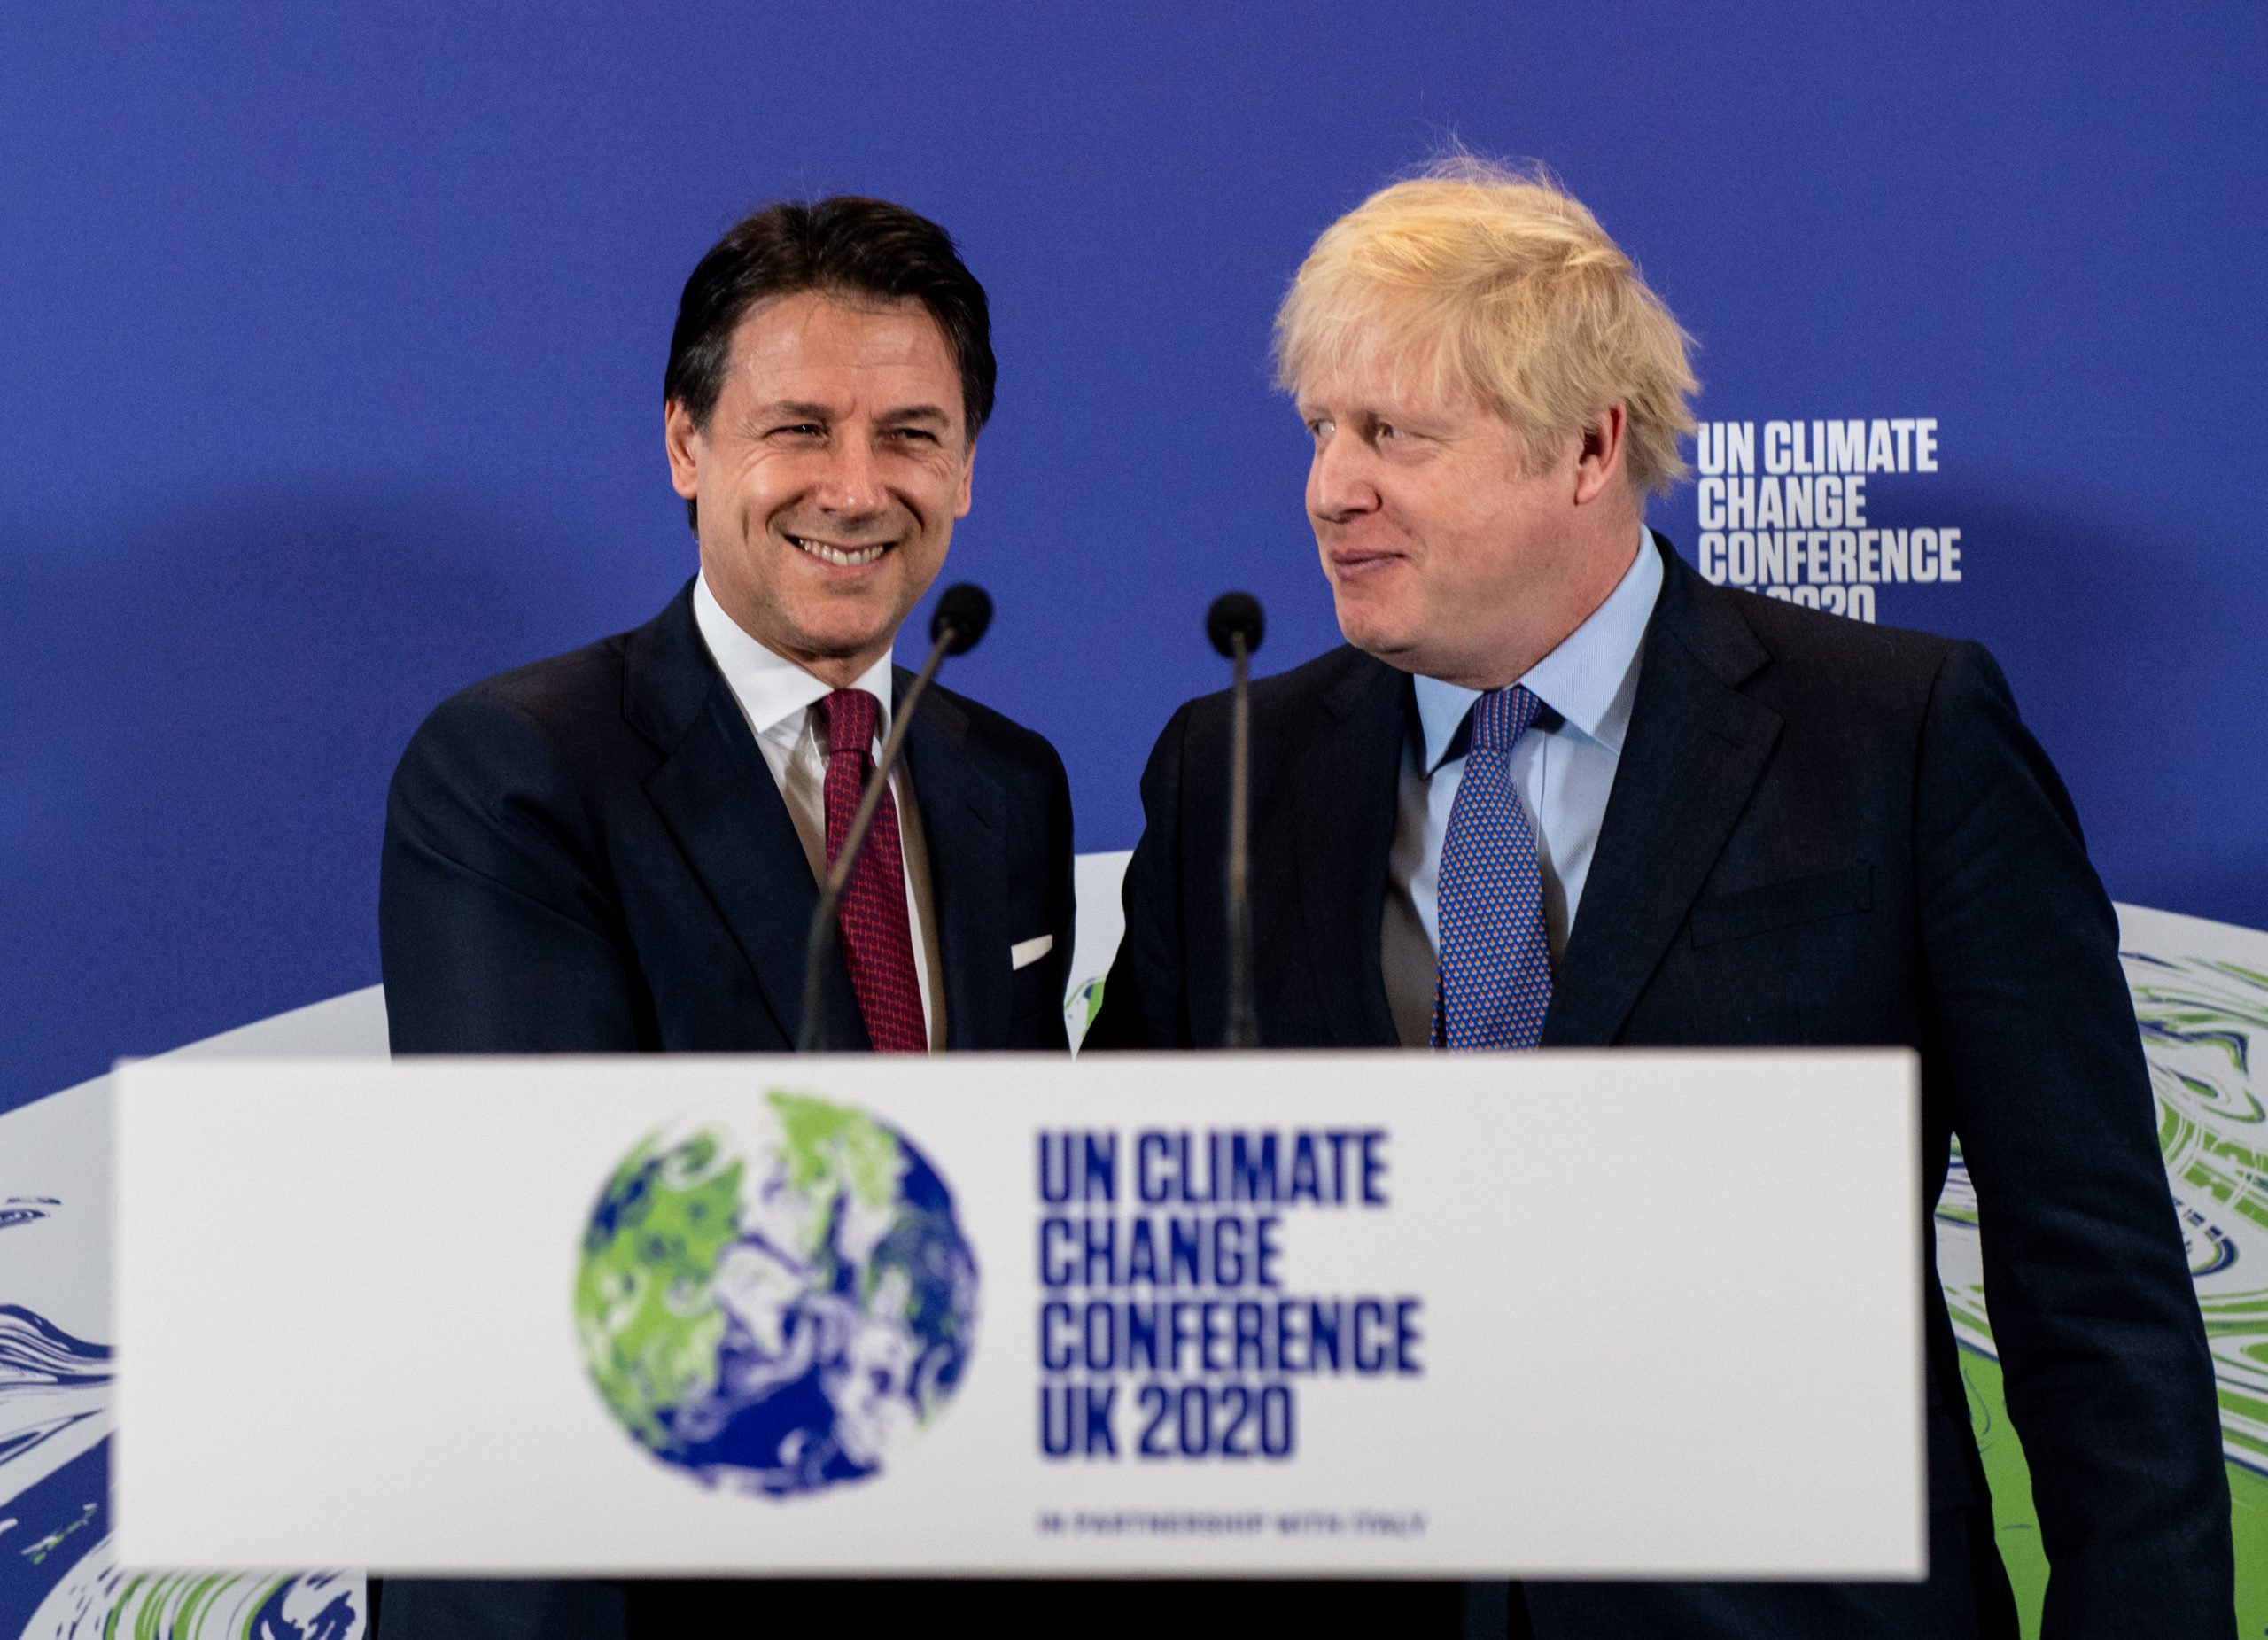 Prime Minister Boris Johnson (right) and Italian Prime Minister Giuseppe Conte at the launch of the next COP26 UN Climate Summit